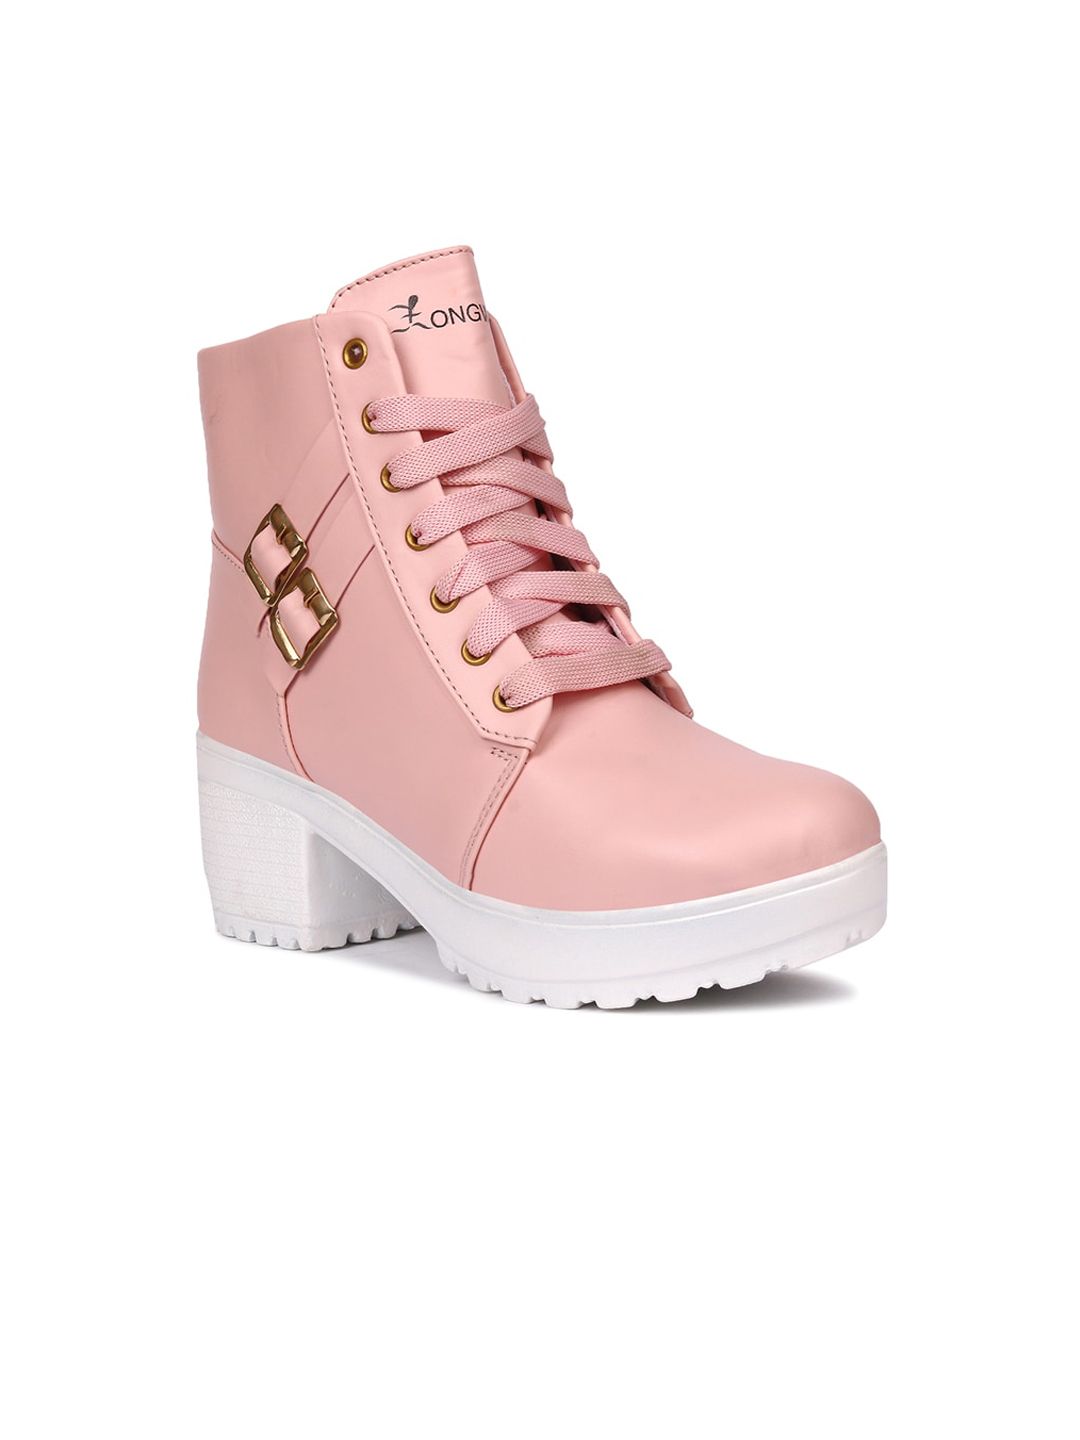 Longwalk Pink & White PU Platform Heeled Boots with Buckles Price in India